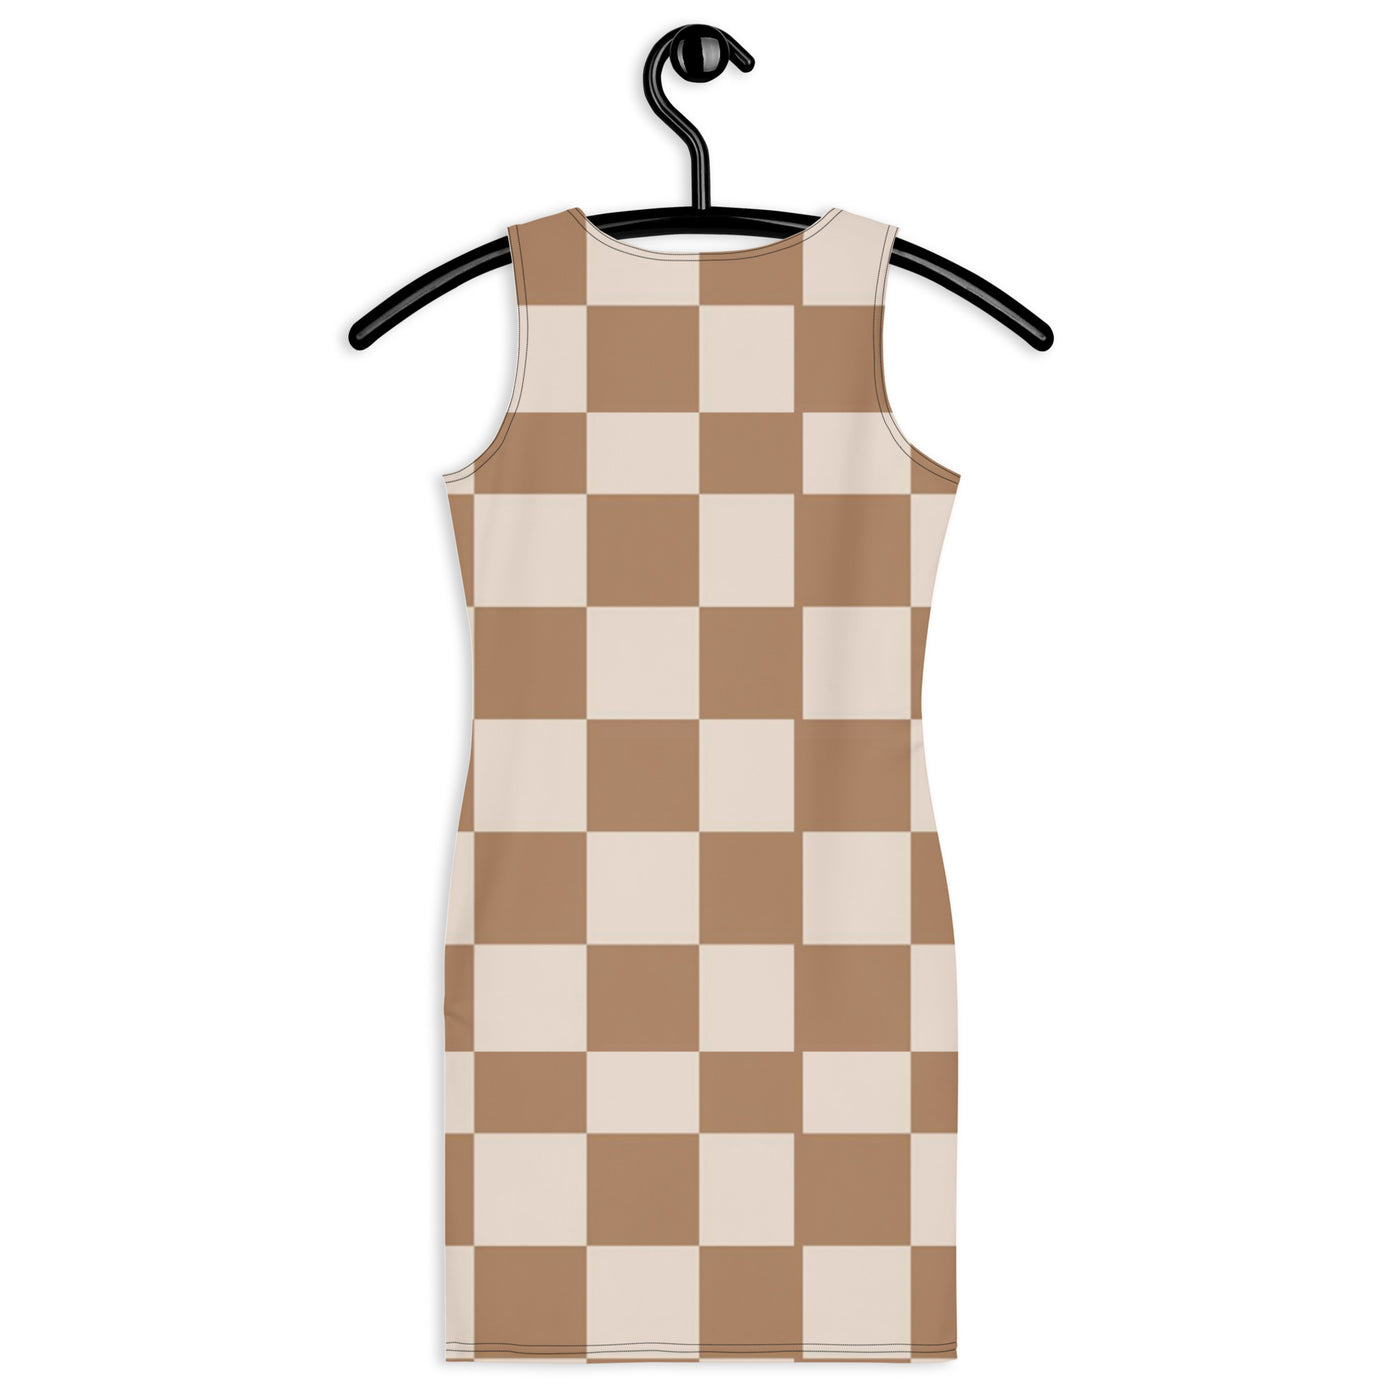 Checkered Sew Dress - NoCeilingsClothing